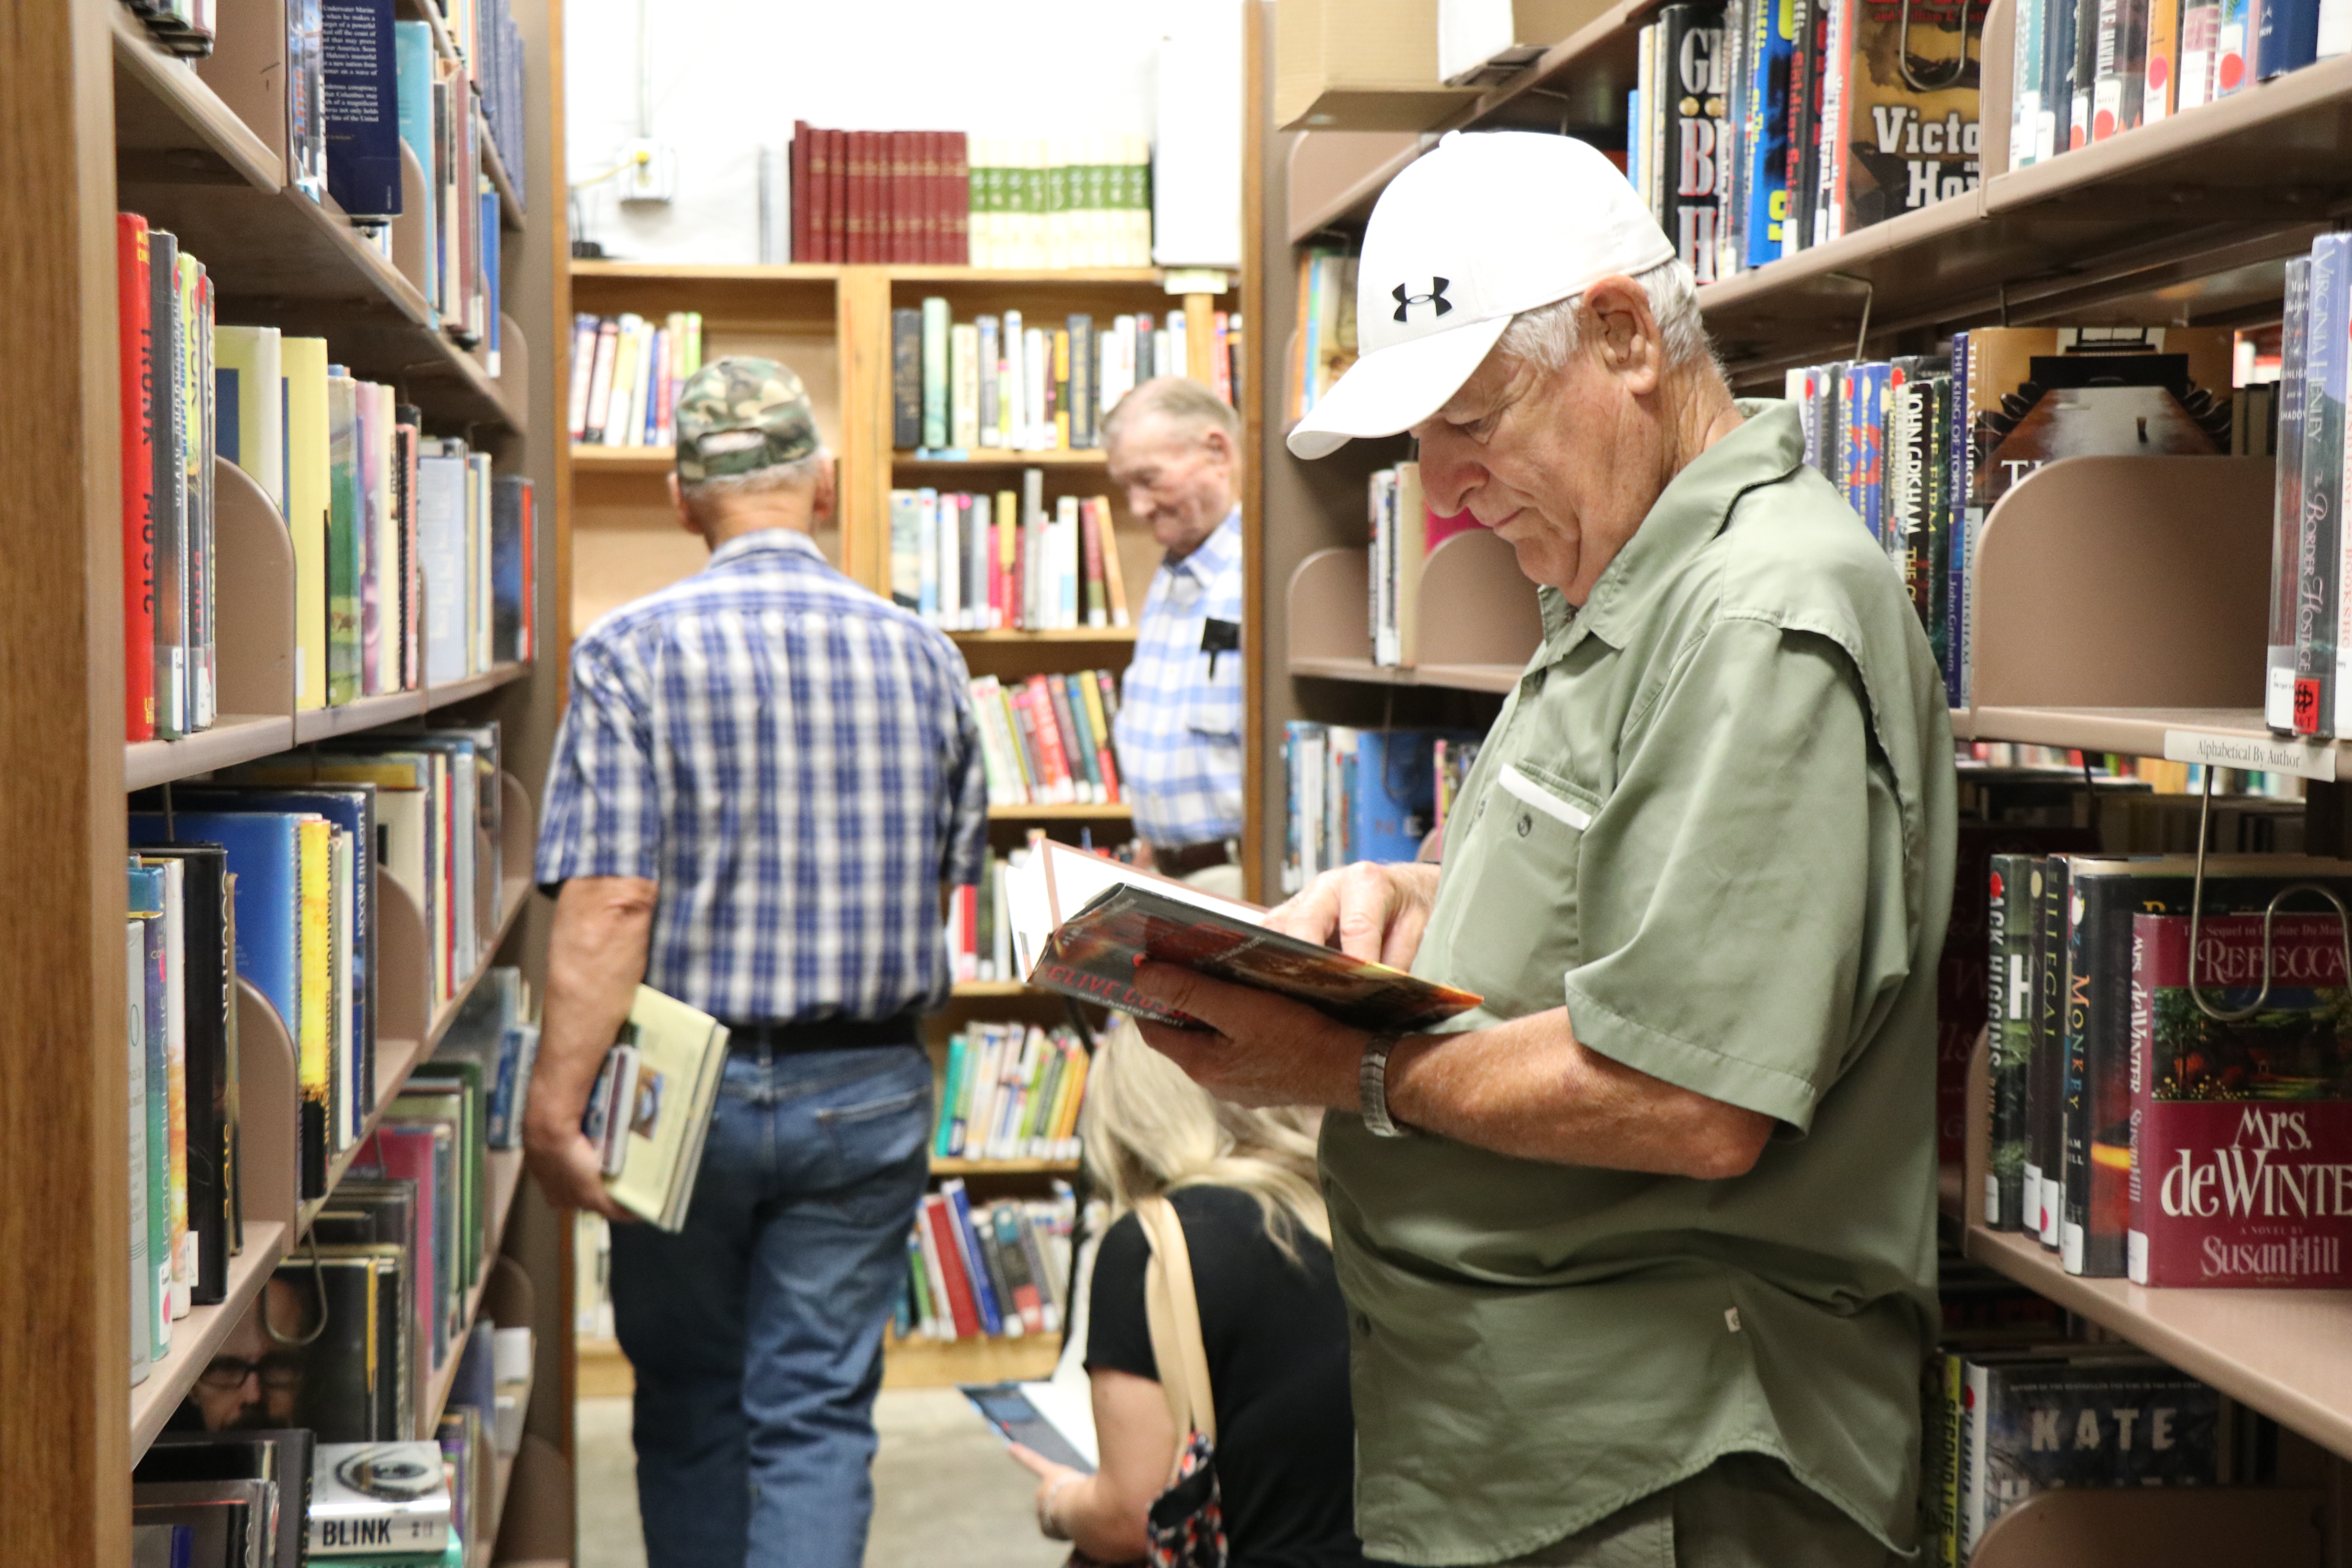 Two men stand in between bookshelves. One is looking down at a book. 